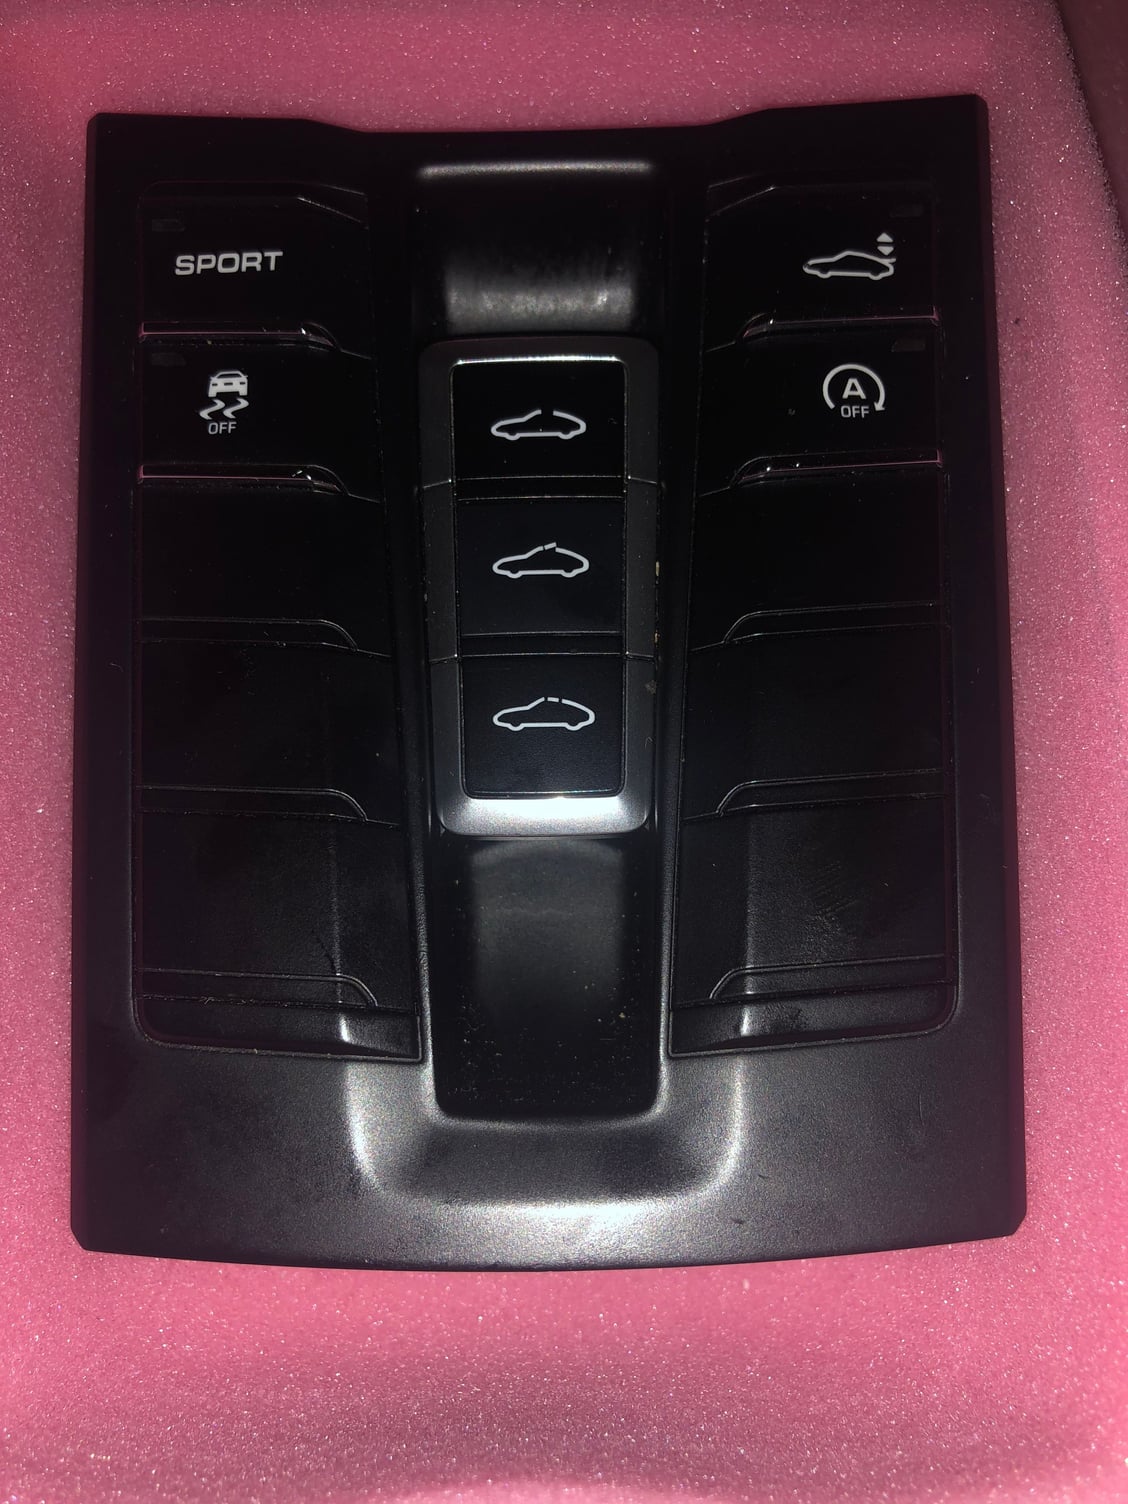 Accessories - 991 switch kit (WITH sunroof) - Used - 2012 to 2016 Porsche 911 - Tampa, FL 34202, United States